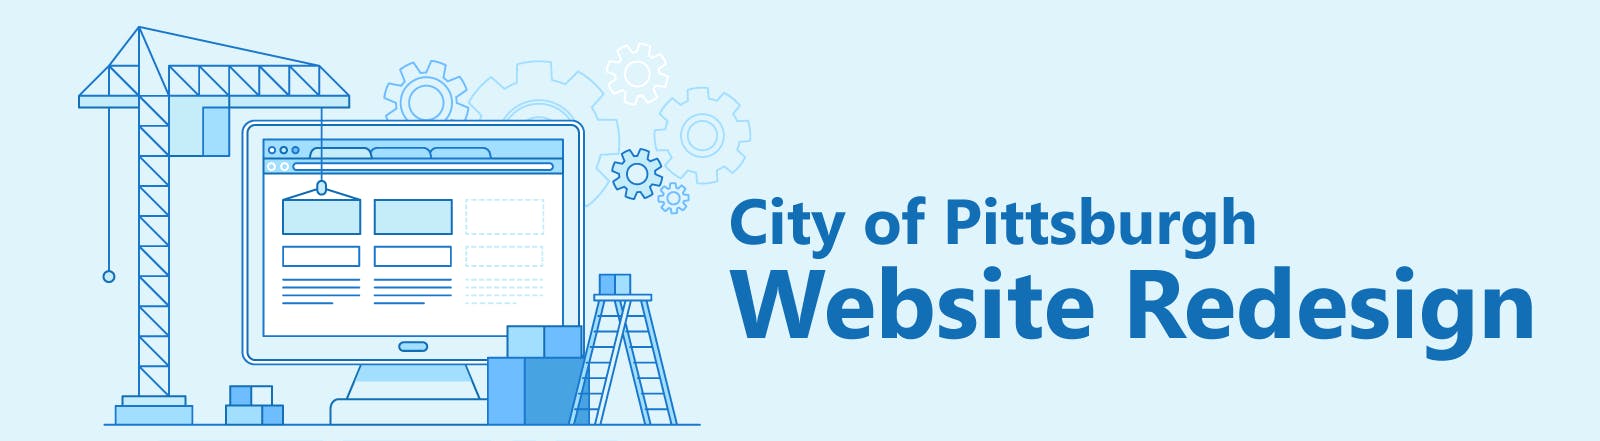 City of Pittsburgh's Website Redesign Project